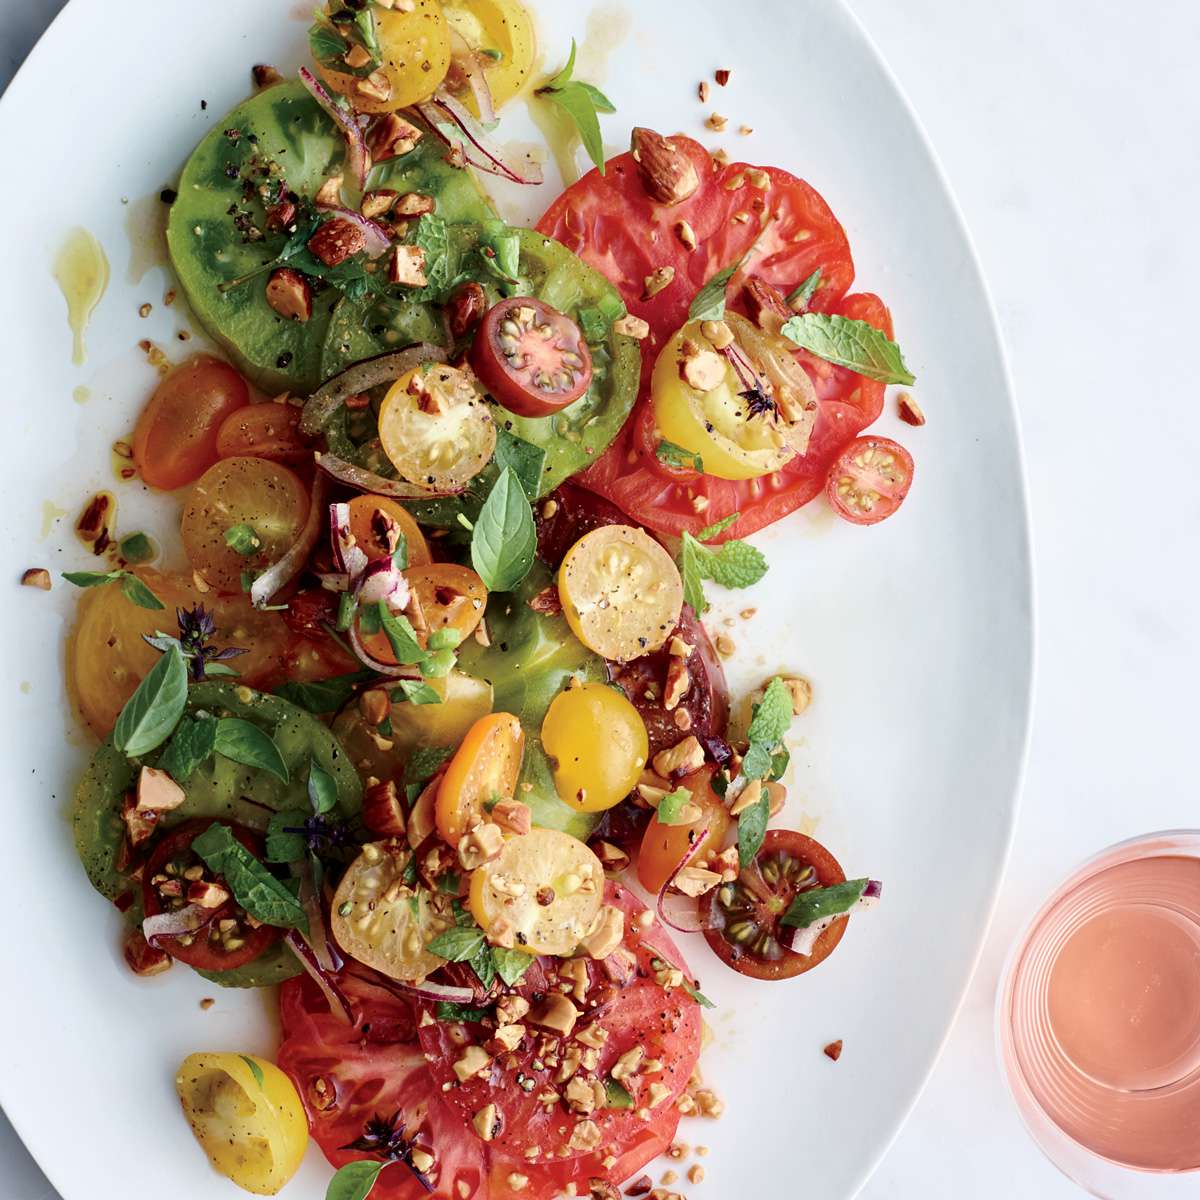 Tomatoes with Herbs and Almond Vinaigrette